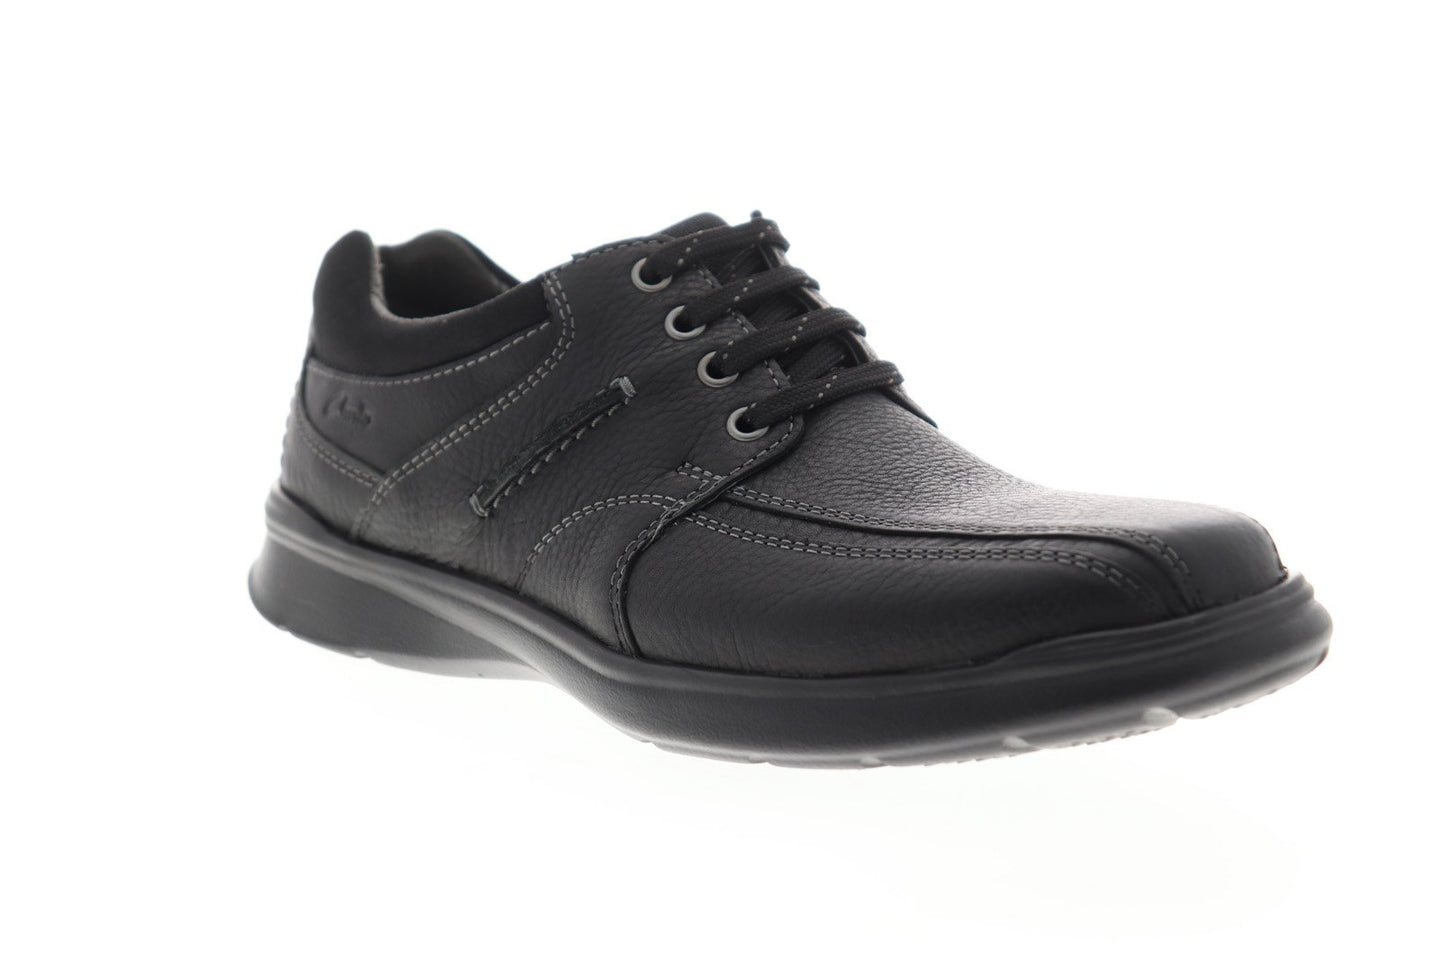 Clarks Cotrell Walk 26119725 Mens Black Leather Casual Lace Up Oxfords ...